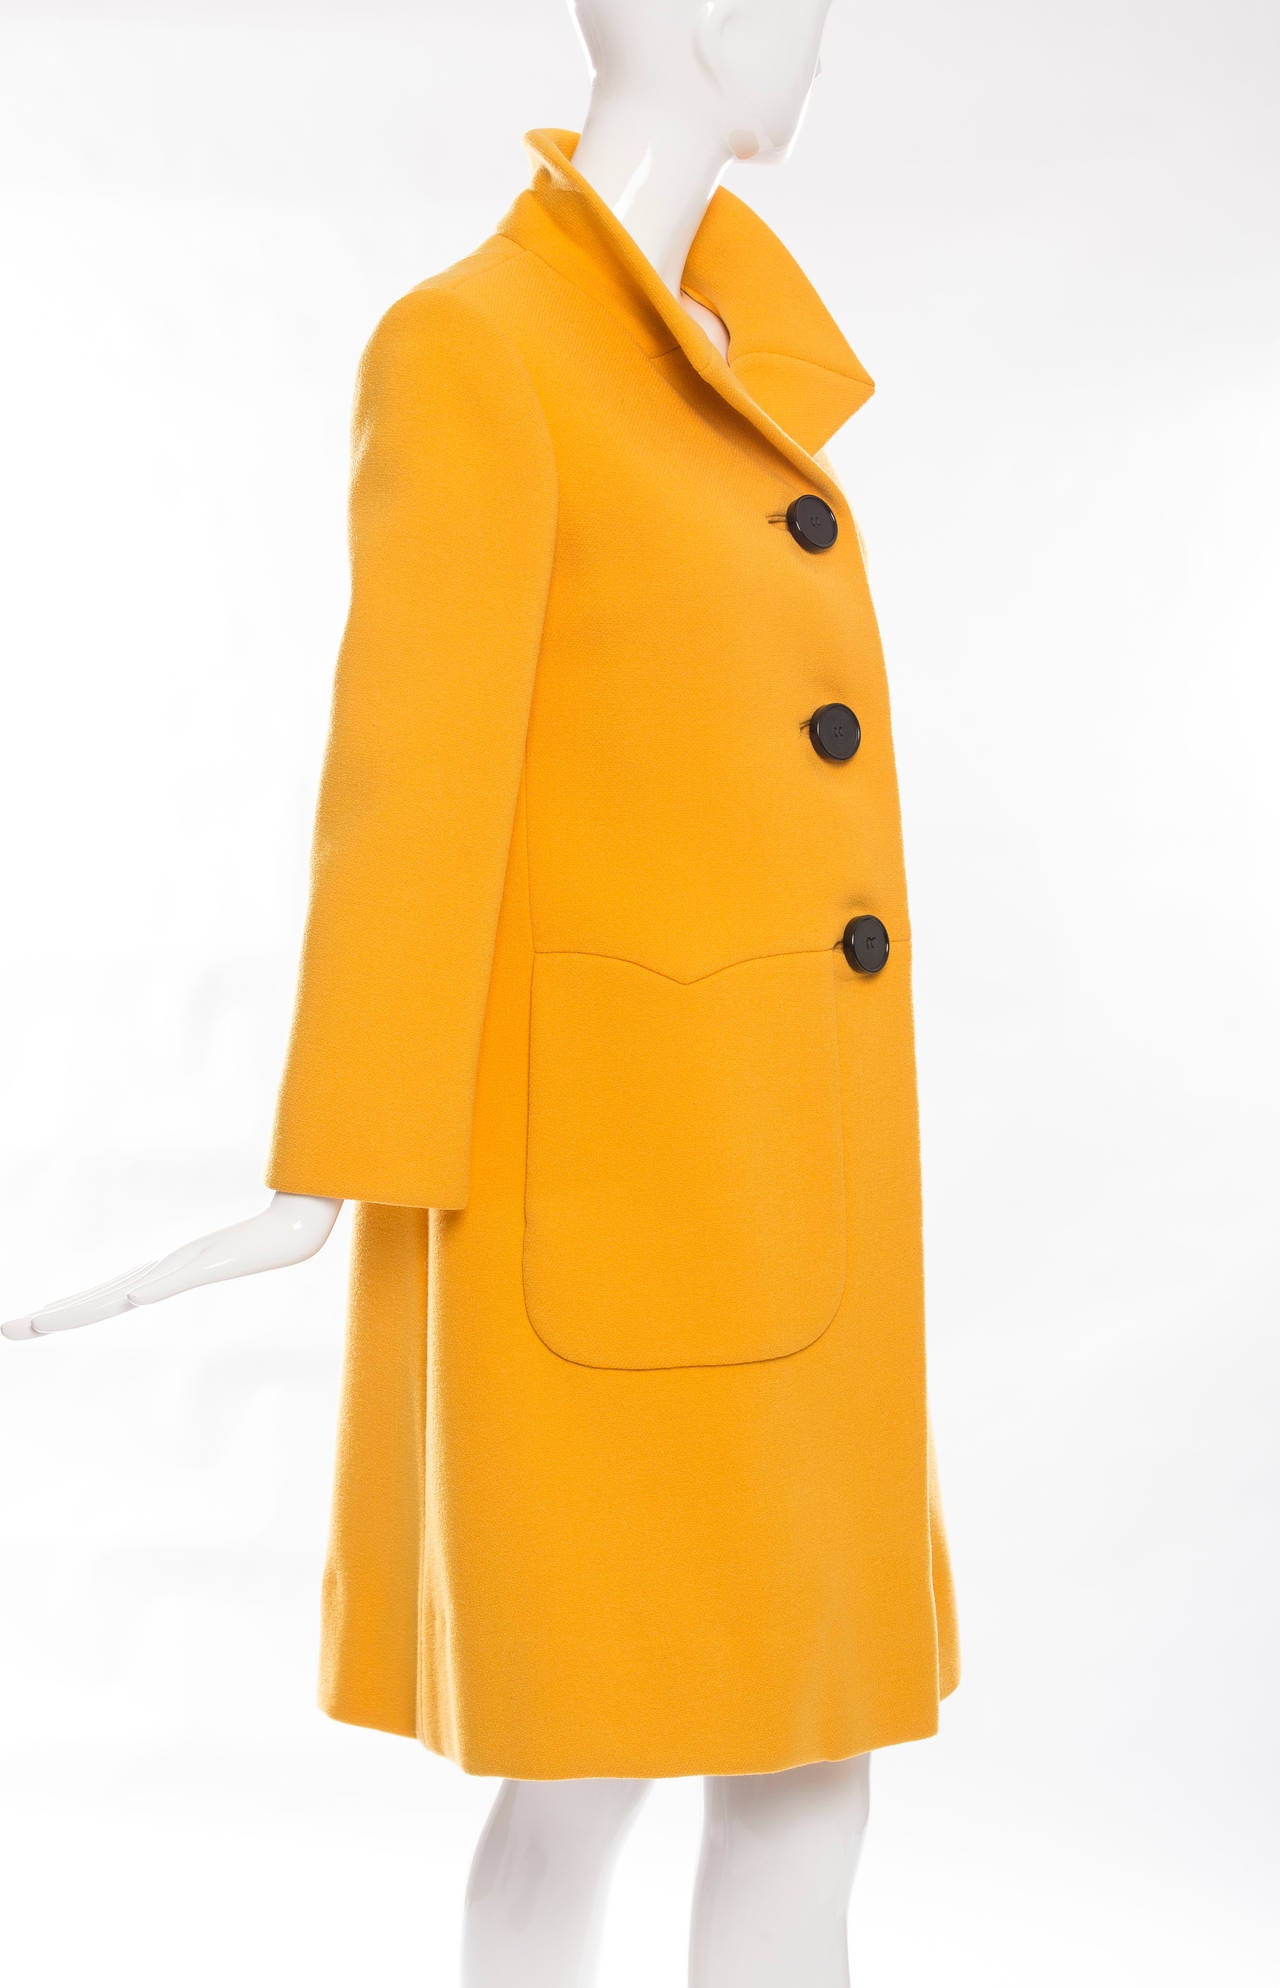 Pauline Trigere yellow wool coat, three large self buttons, two side pockets and fully lined in satin.